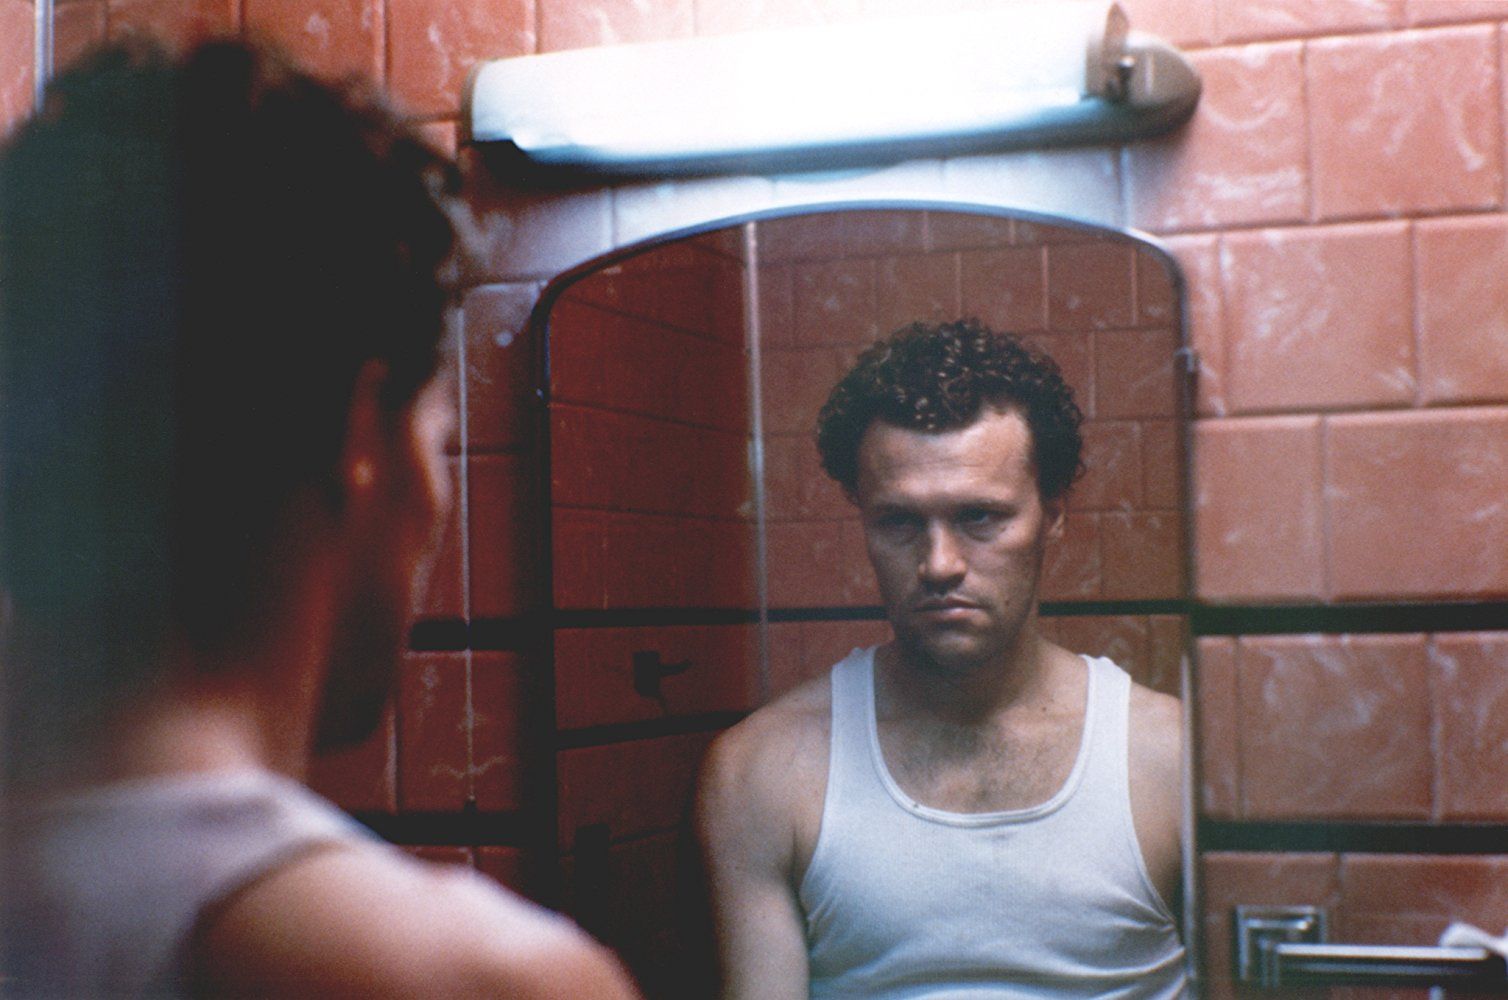 Michael Rooker in Henry: Portrait of a Serial Killer looking at himself in the mirror